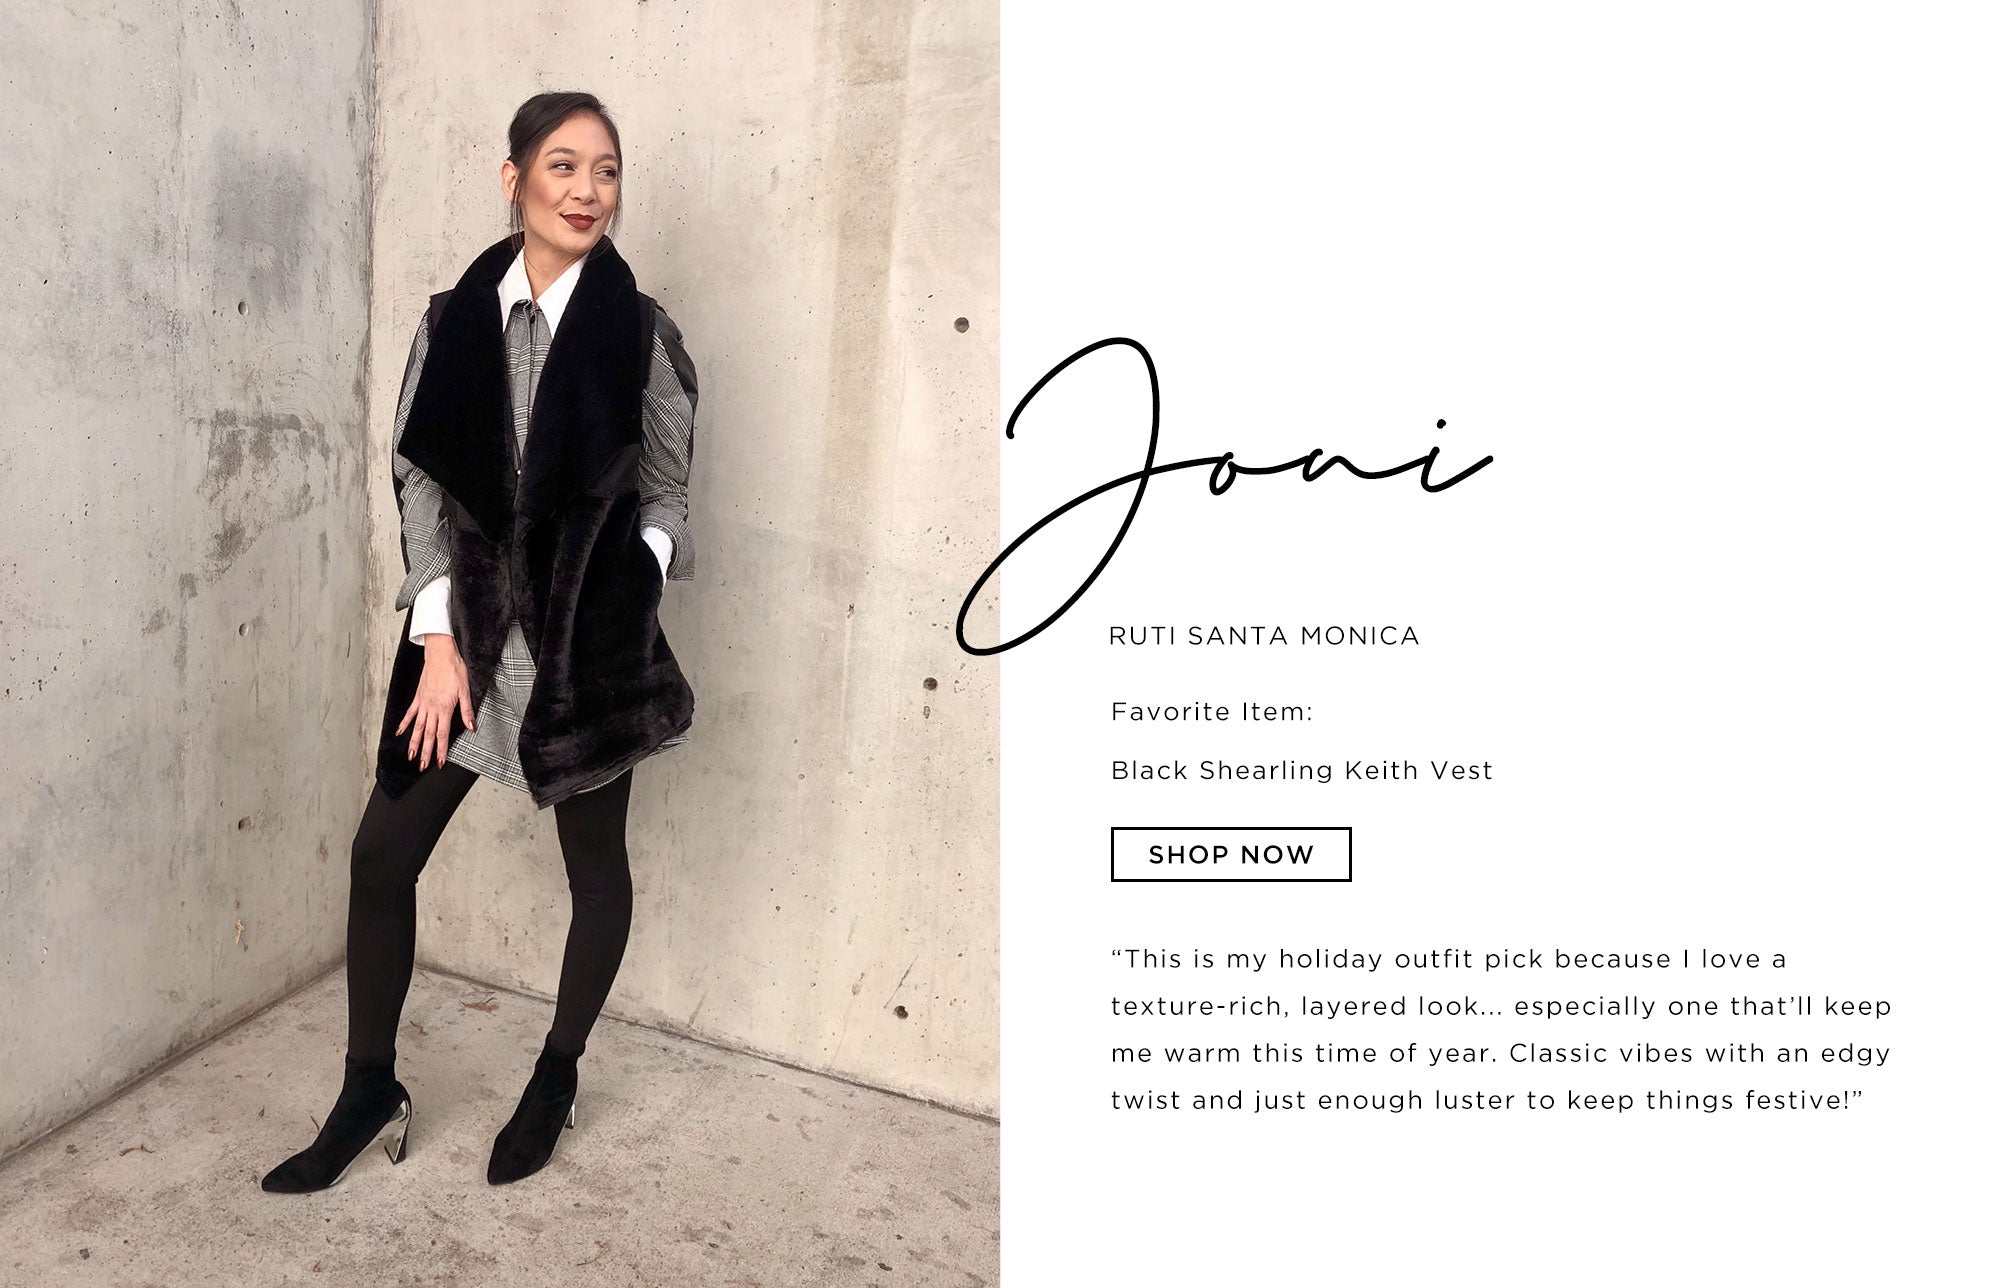 Joni Ruti Santa Monica   This is my holiday outfit pick because I love a texture-rich, layered look... especially one that’ll keep me warm this time of year. Classic vibes with an edgy twist and just enough luster to keep things festive!